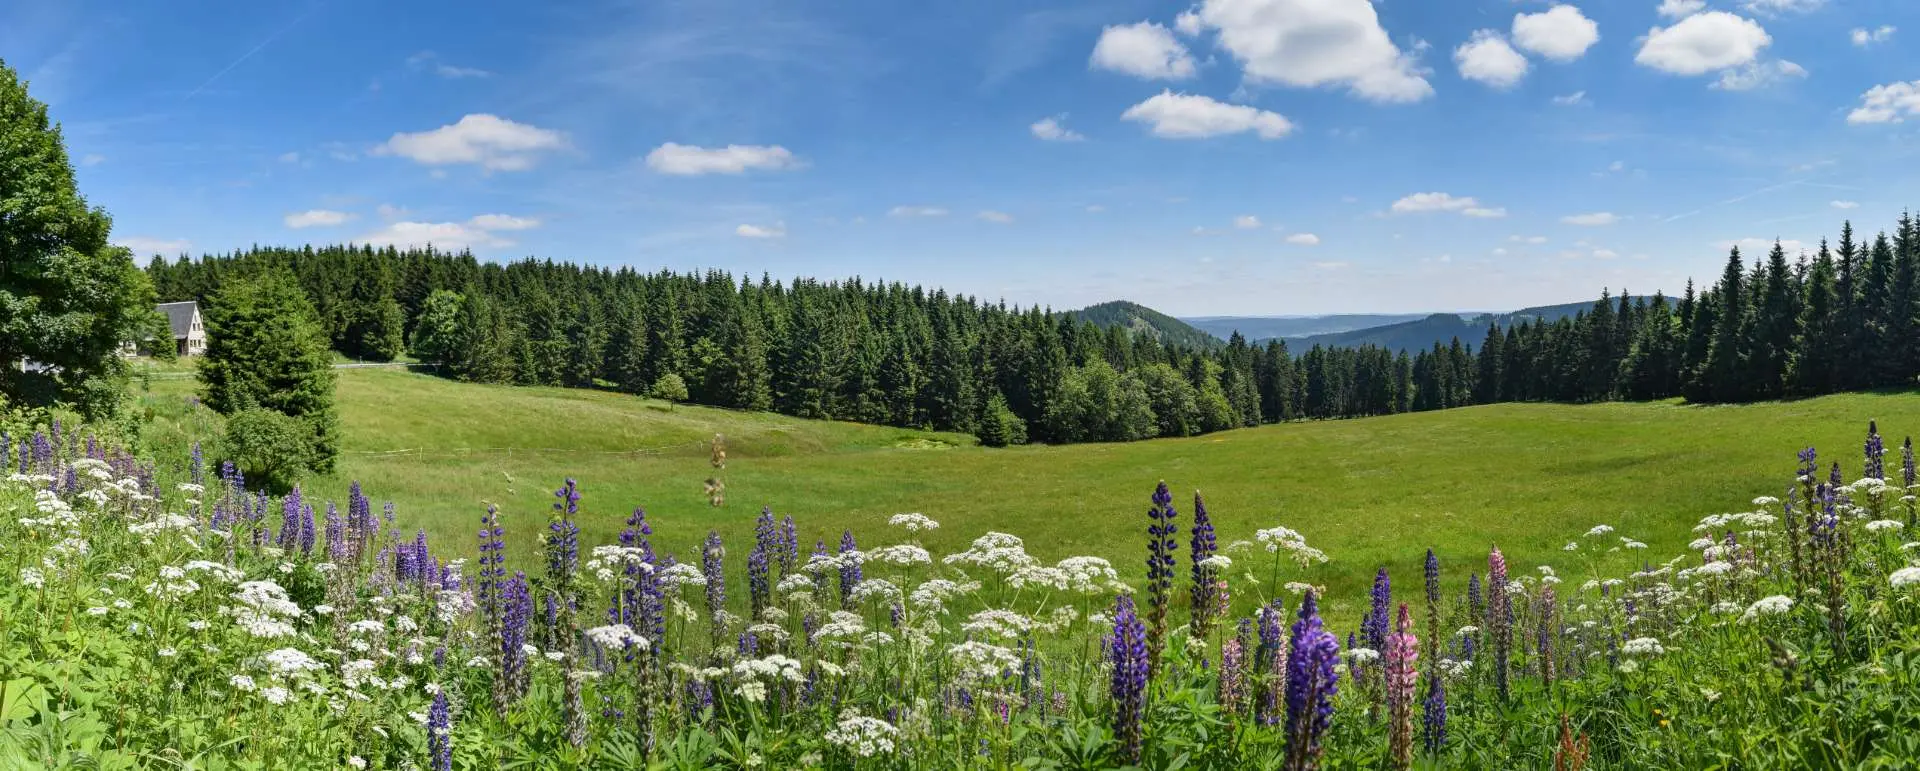 Thuringian Forest - optimal hotels for choir and music groups